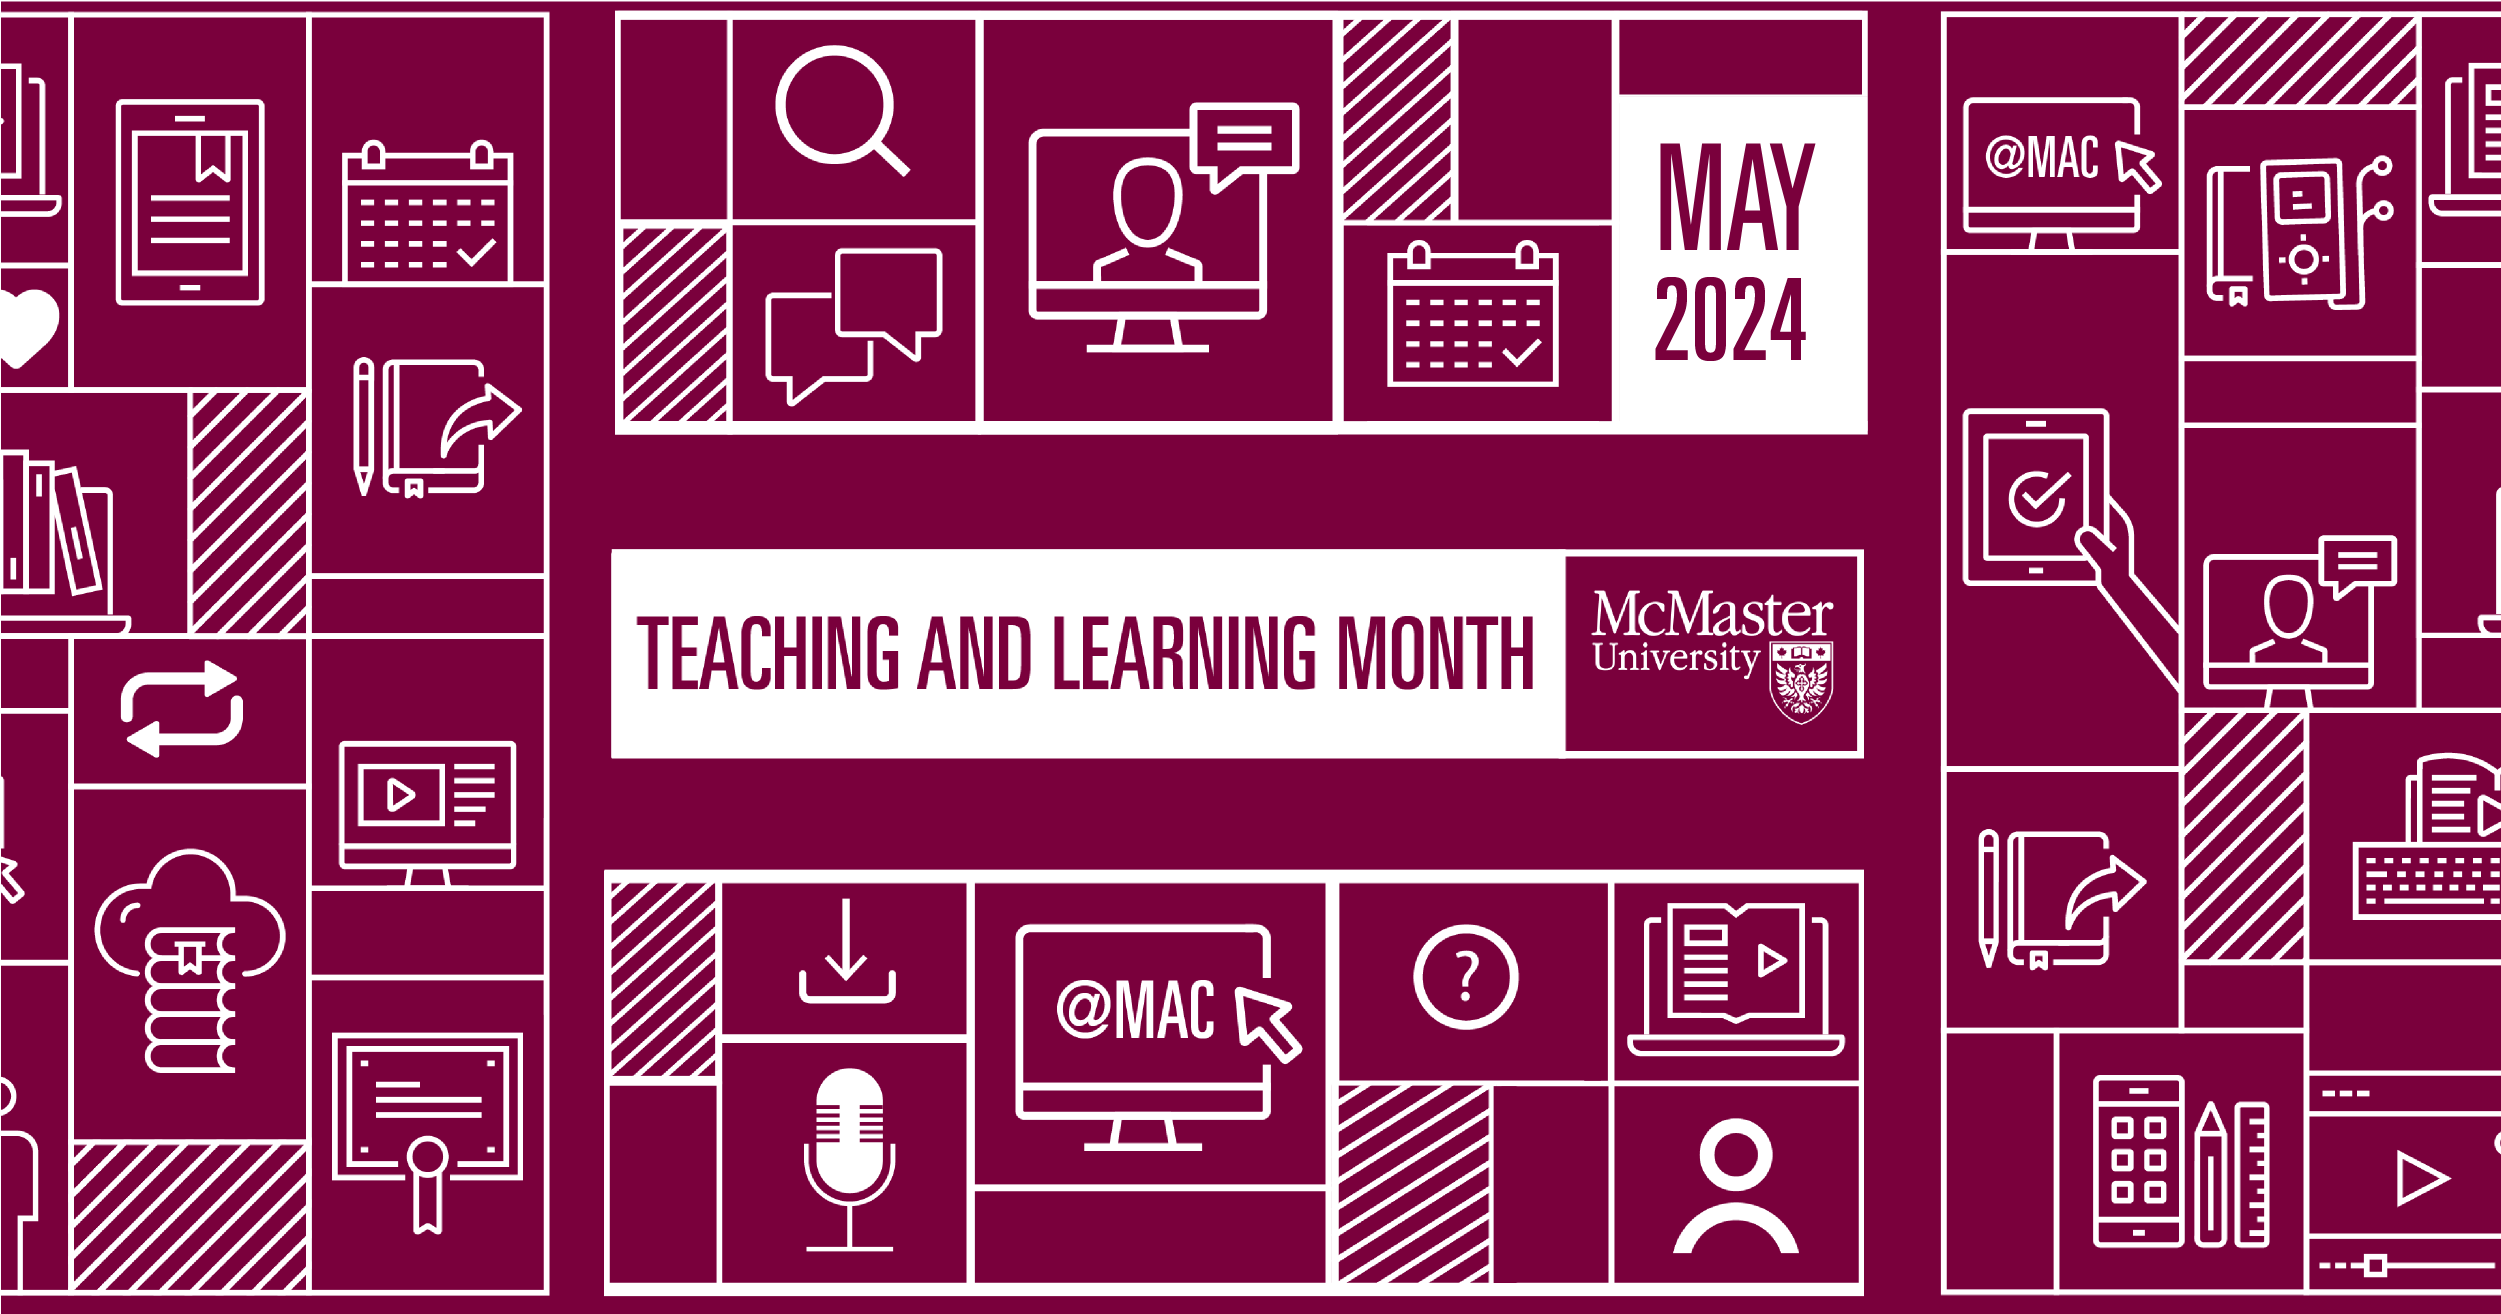 Teaching and Learning Month graphic featuring a maroon background with white icons showing microphones, calendars, notebooks, pencils and calculators, arrows, computers, and hearts. Text reads: Teaching and Learning Month, McMaster University, May 2024.